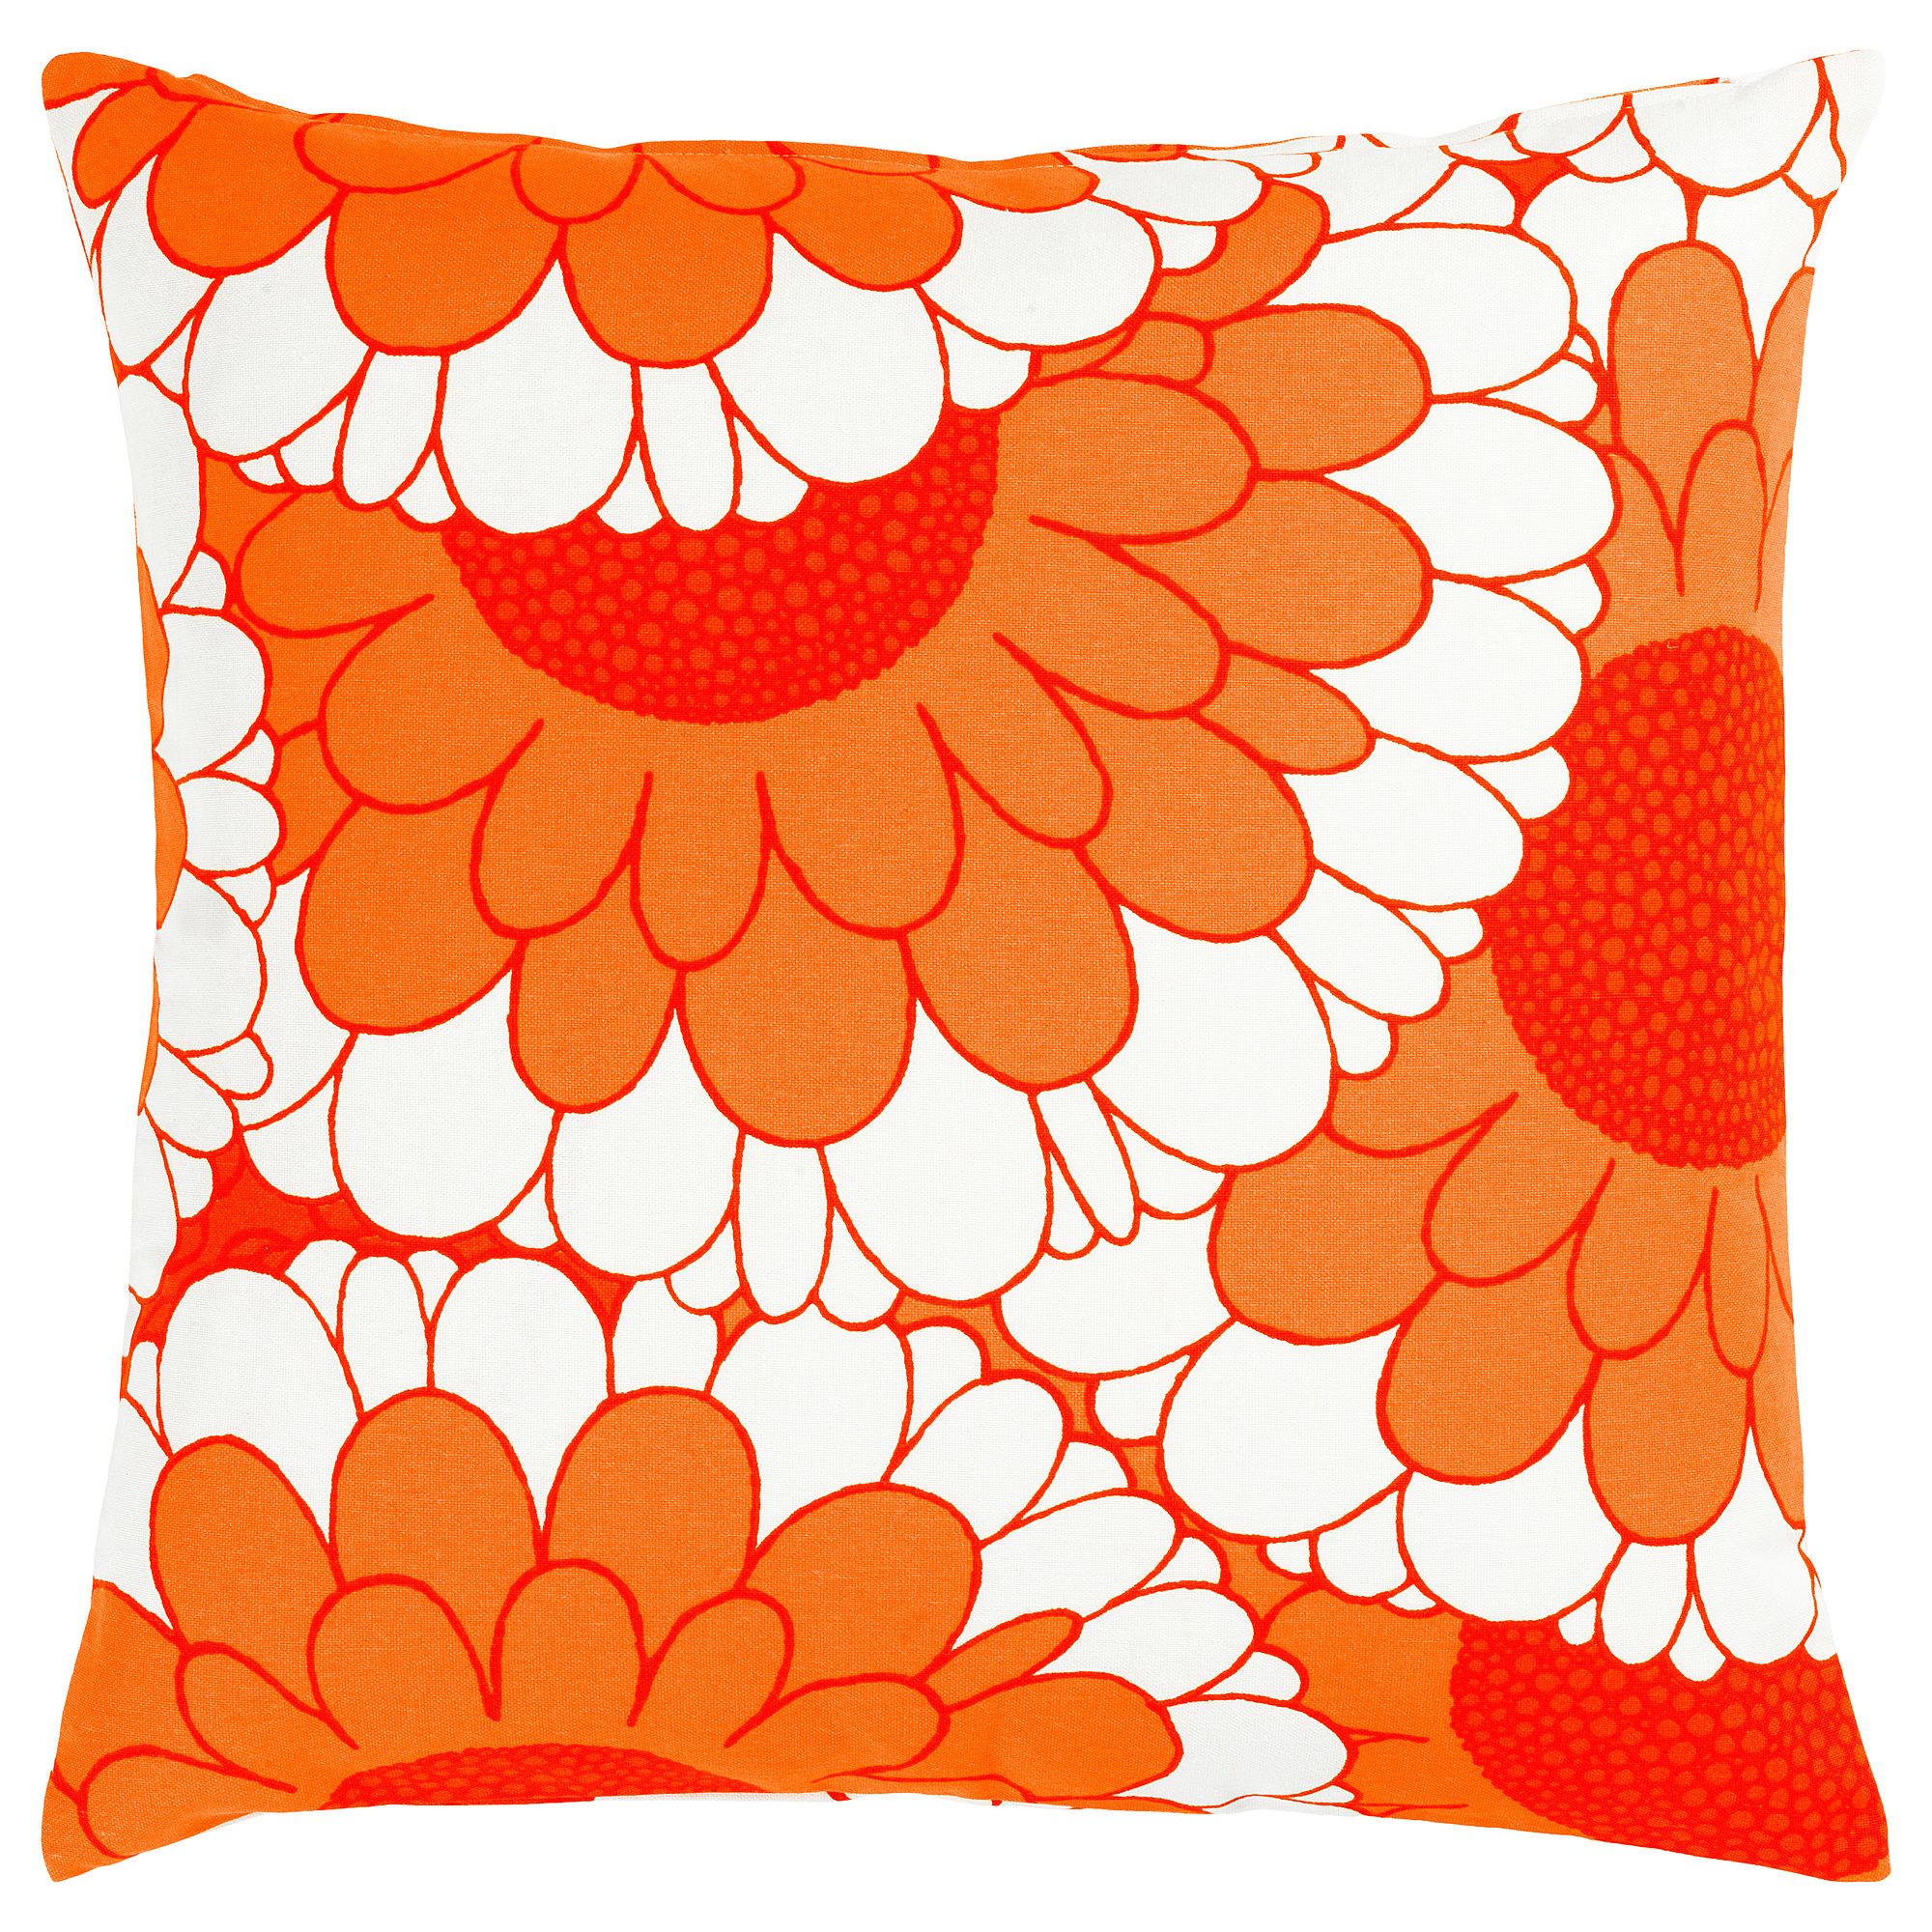 SANDETERNELL cushion cover